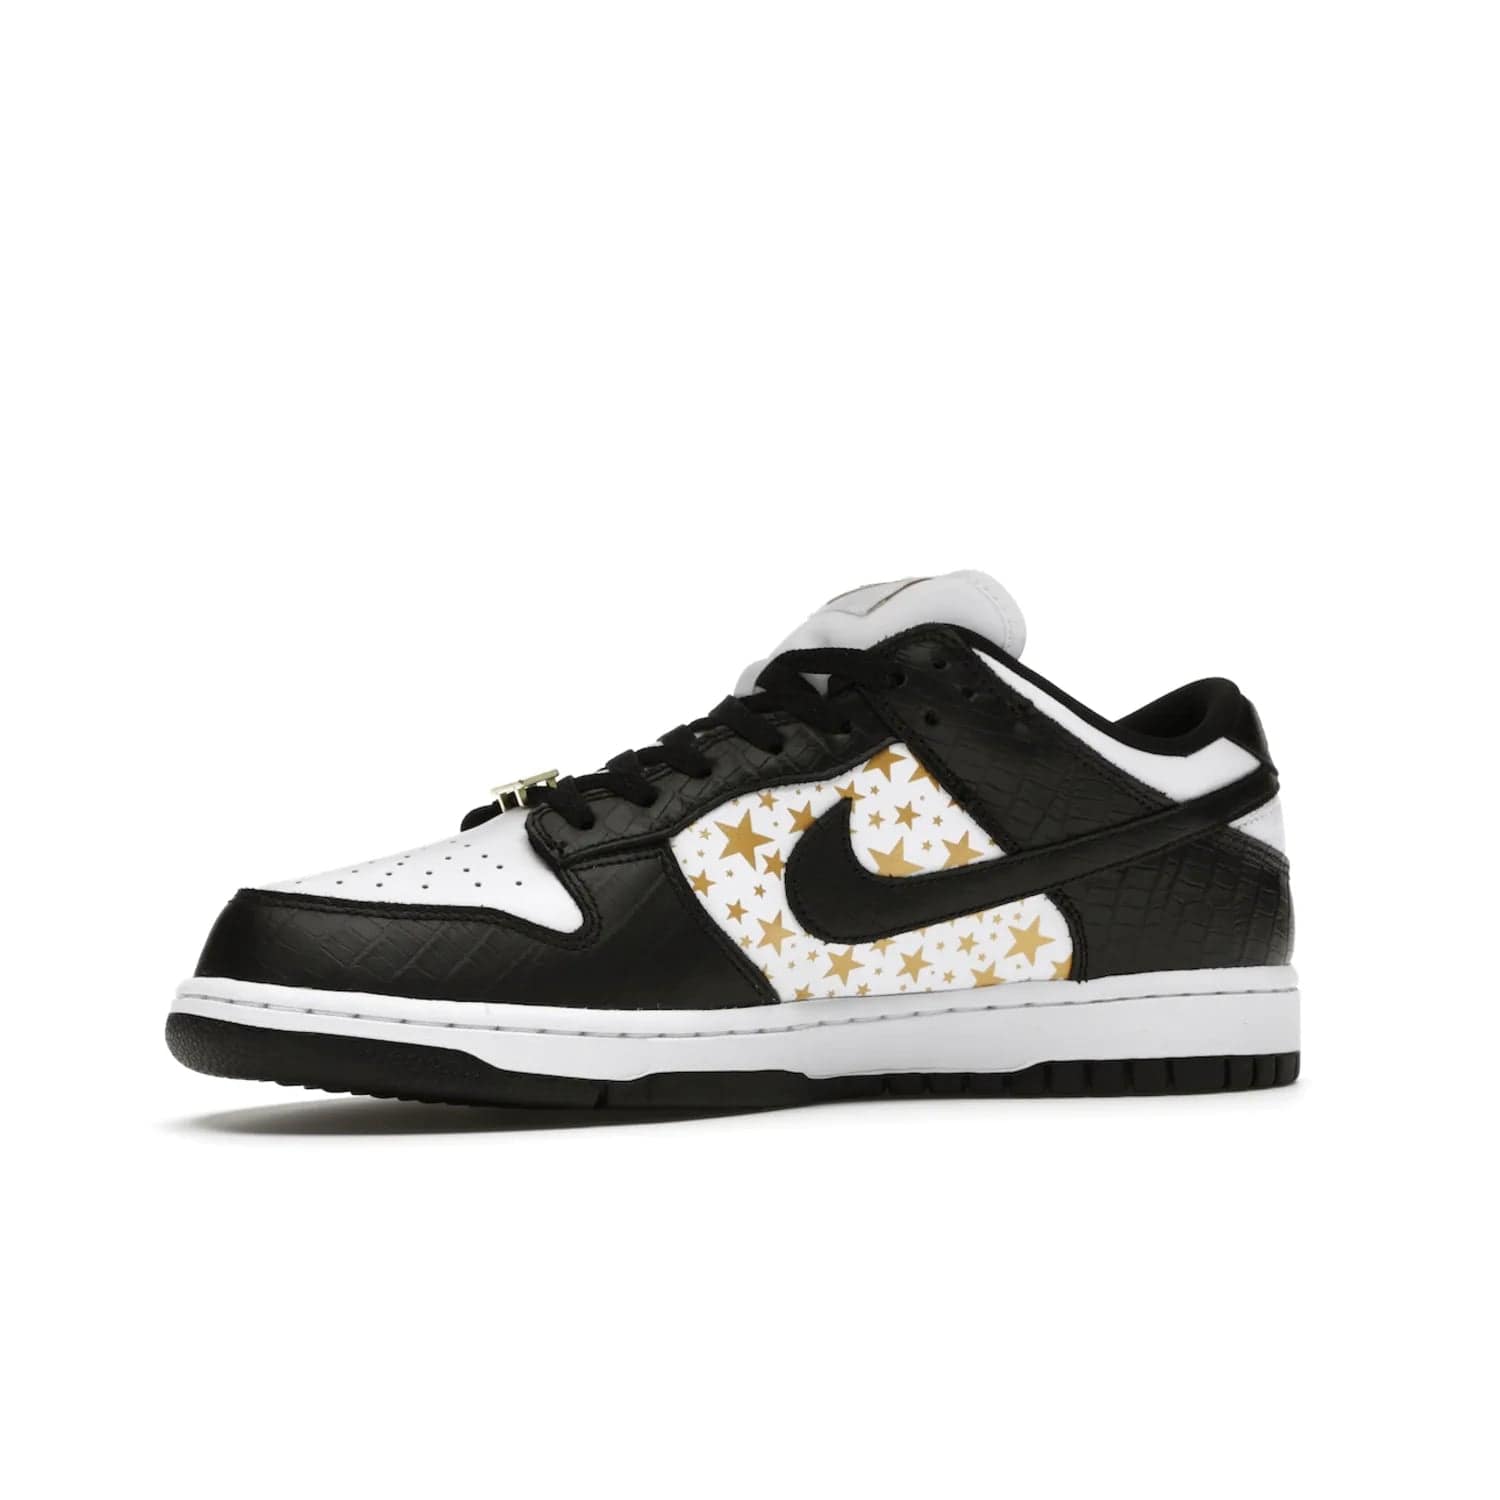 Nike SB Dunk Low Supreme Stars Black (2021) - Image 17 - Only at www.BallersClubKickz.com - Retro style and signature details make the Nike SB Dunk Low Supreme Black a must-have. This special edition shoe features a white leather upper and black croc skin overlays complemented by gold stars and deubré. Enjoy a piece of SB history and grab yours today.